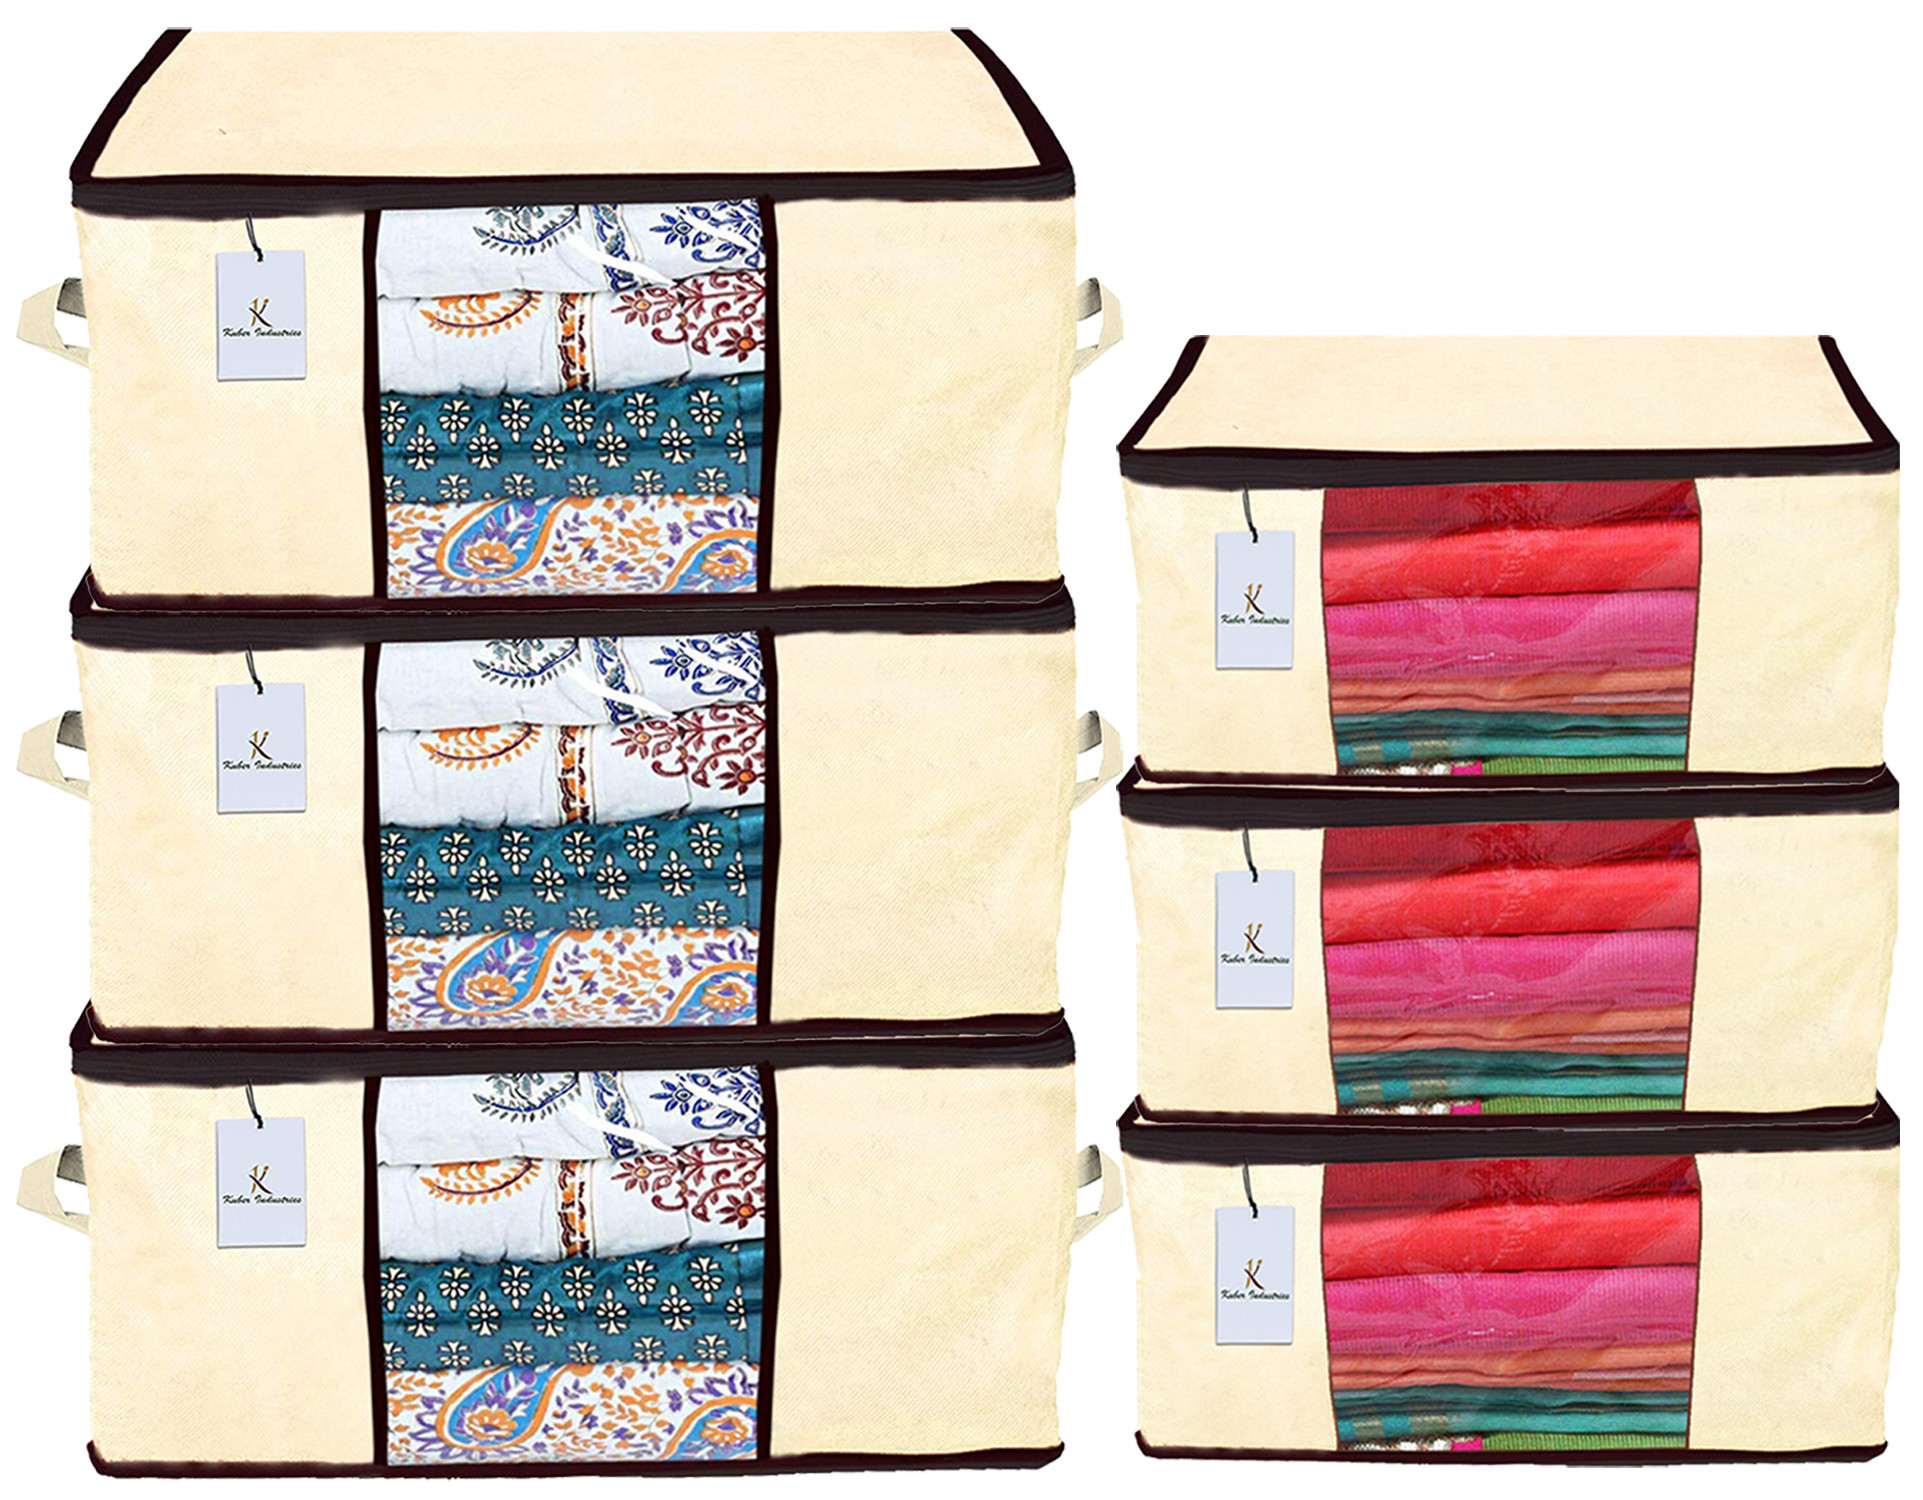 Kuber Industries Non Woven Saree Cover And Underbed Storage Bag, Cloth Organizer For Storage, Blanket Cover Combo Set (Ivory) -CTKTC38511